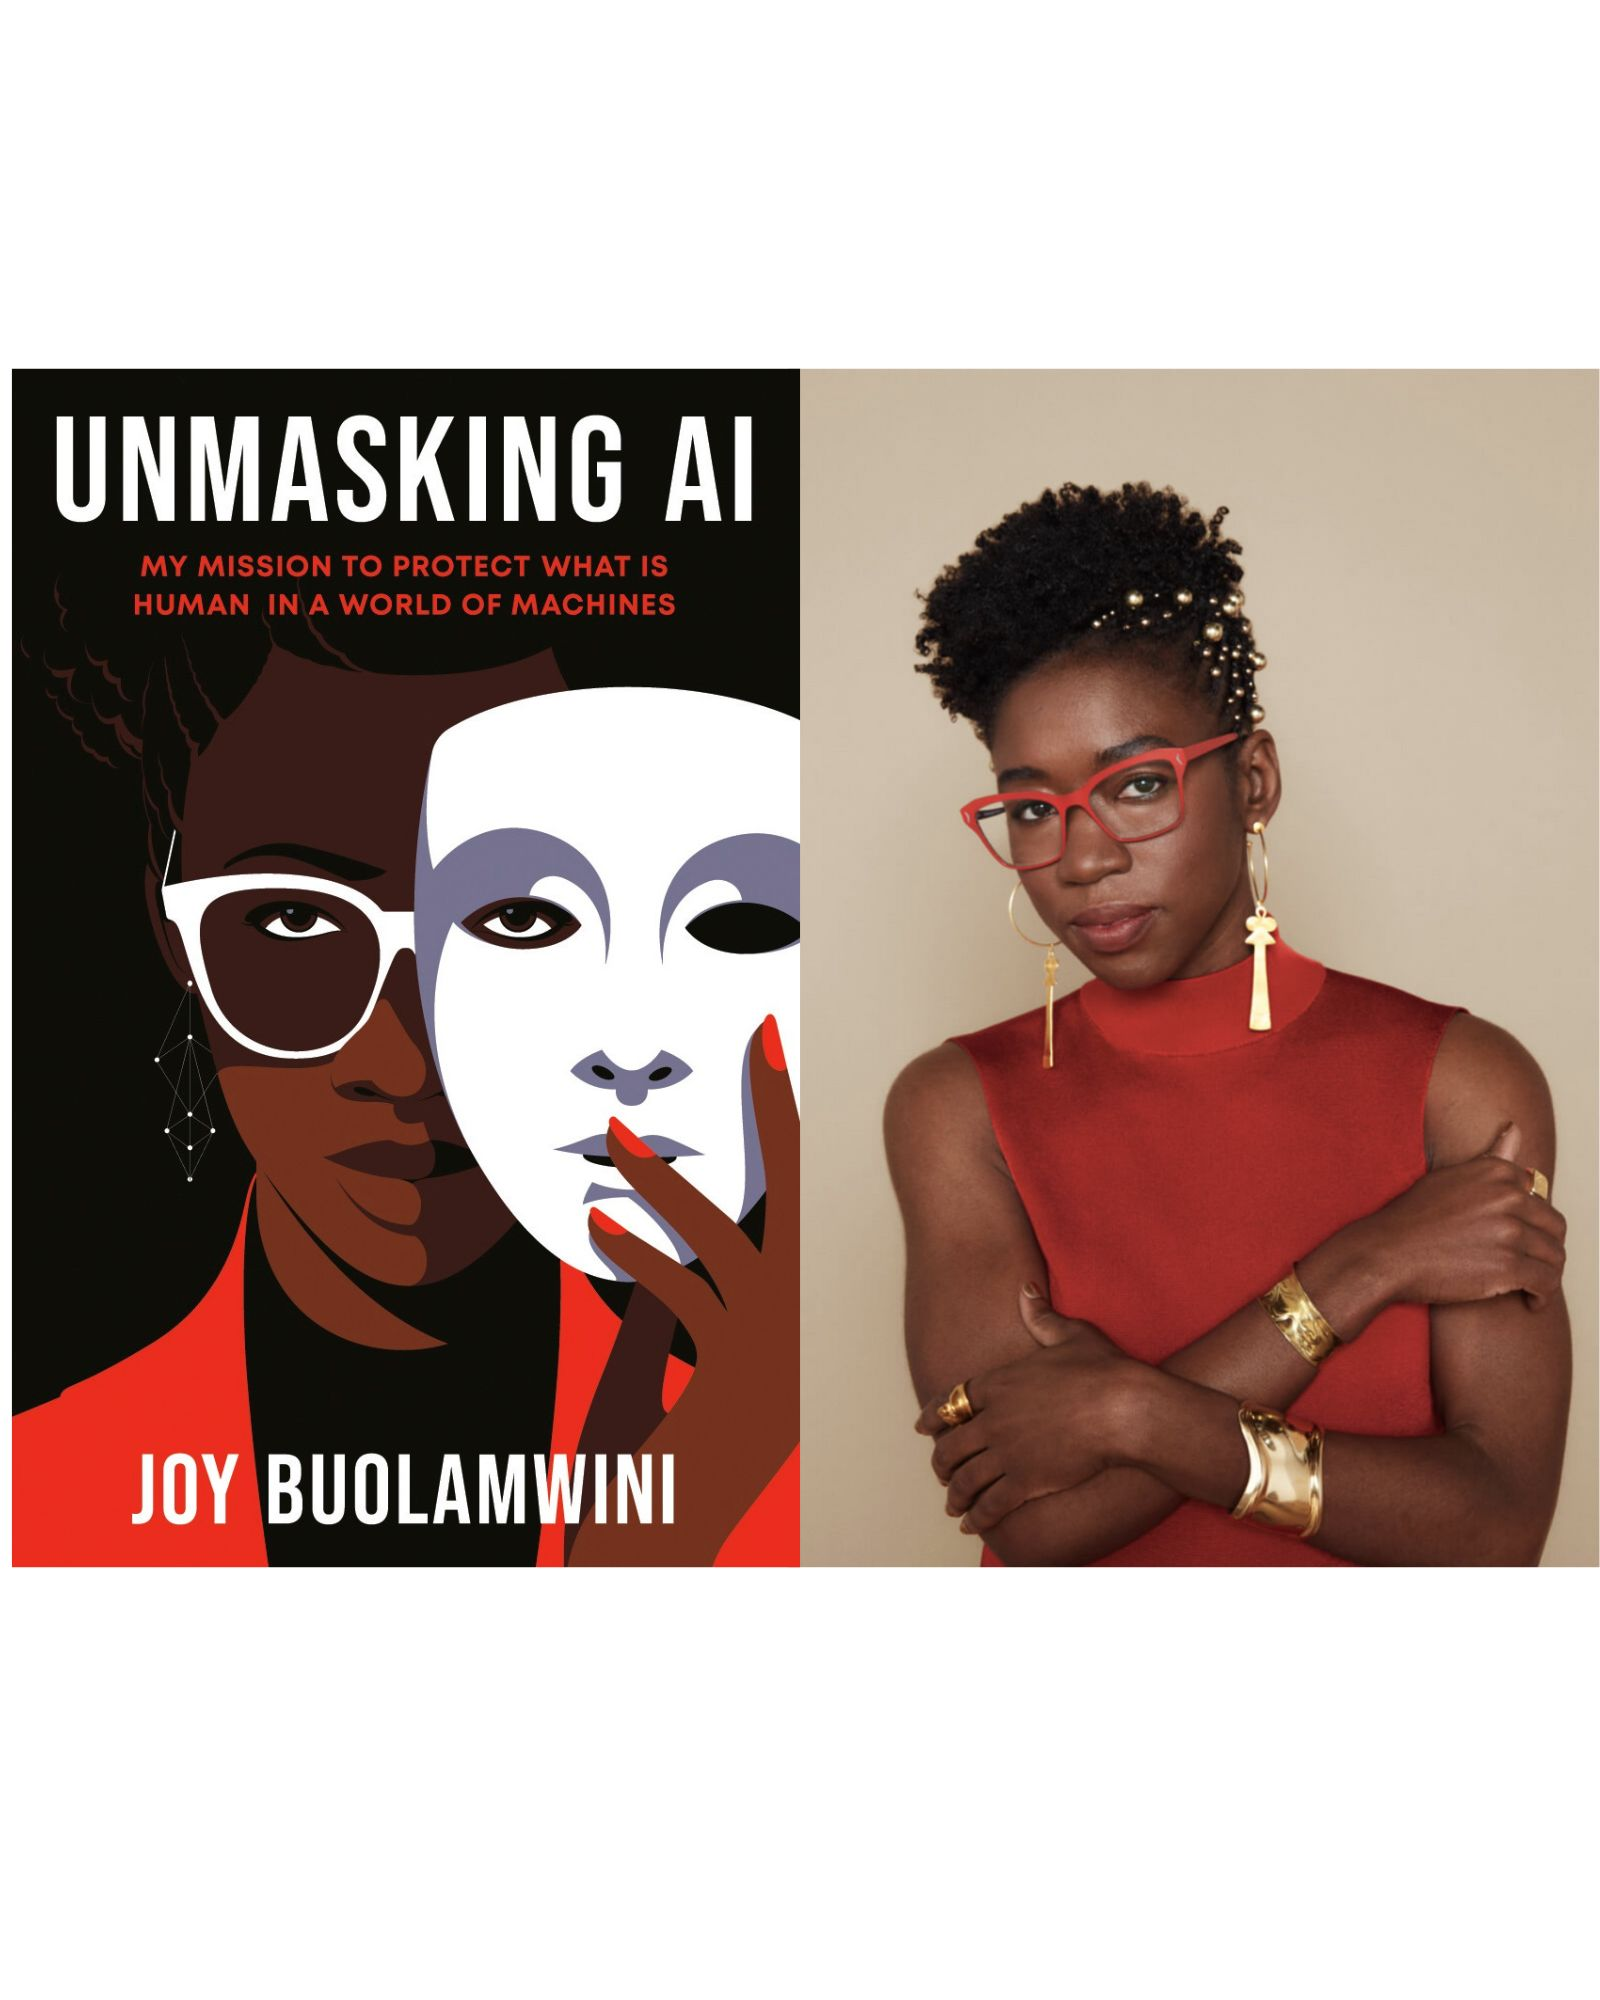 Dr. Joy Buolamwini questions technology in "Unmasking AI"